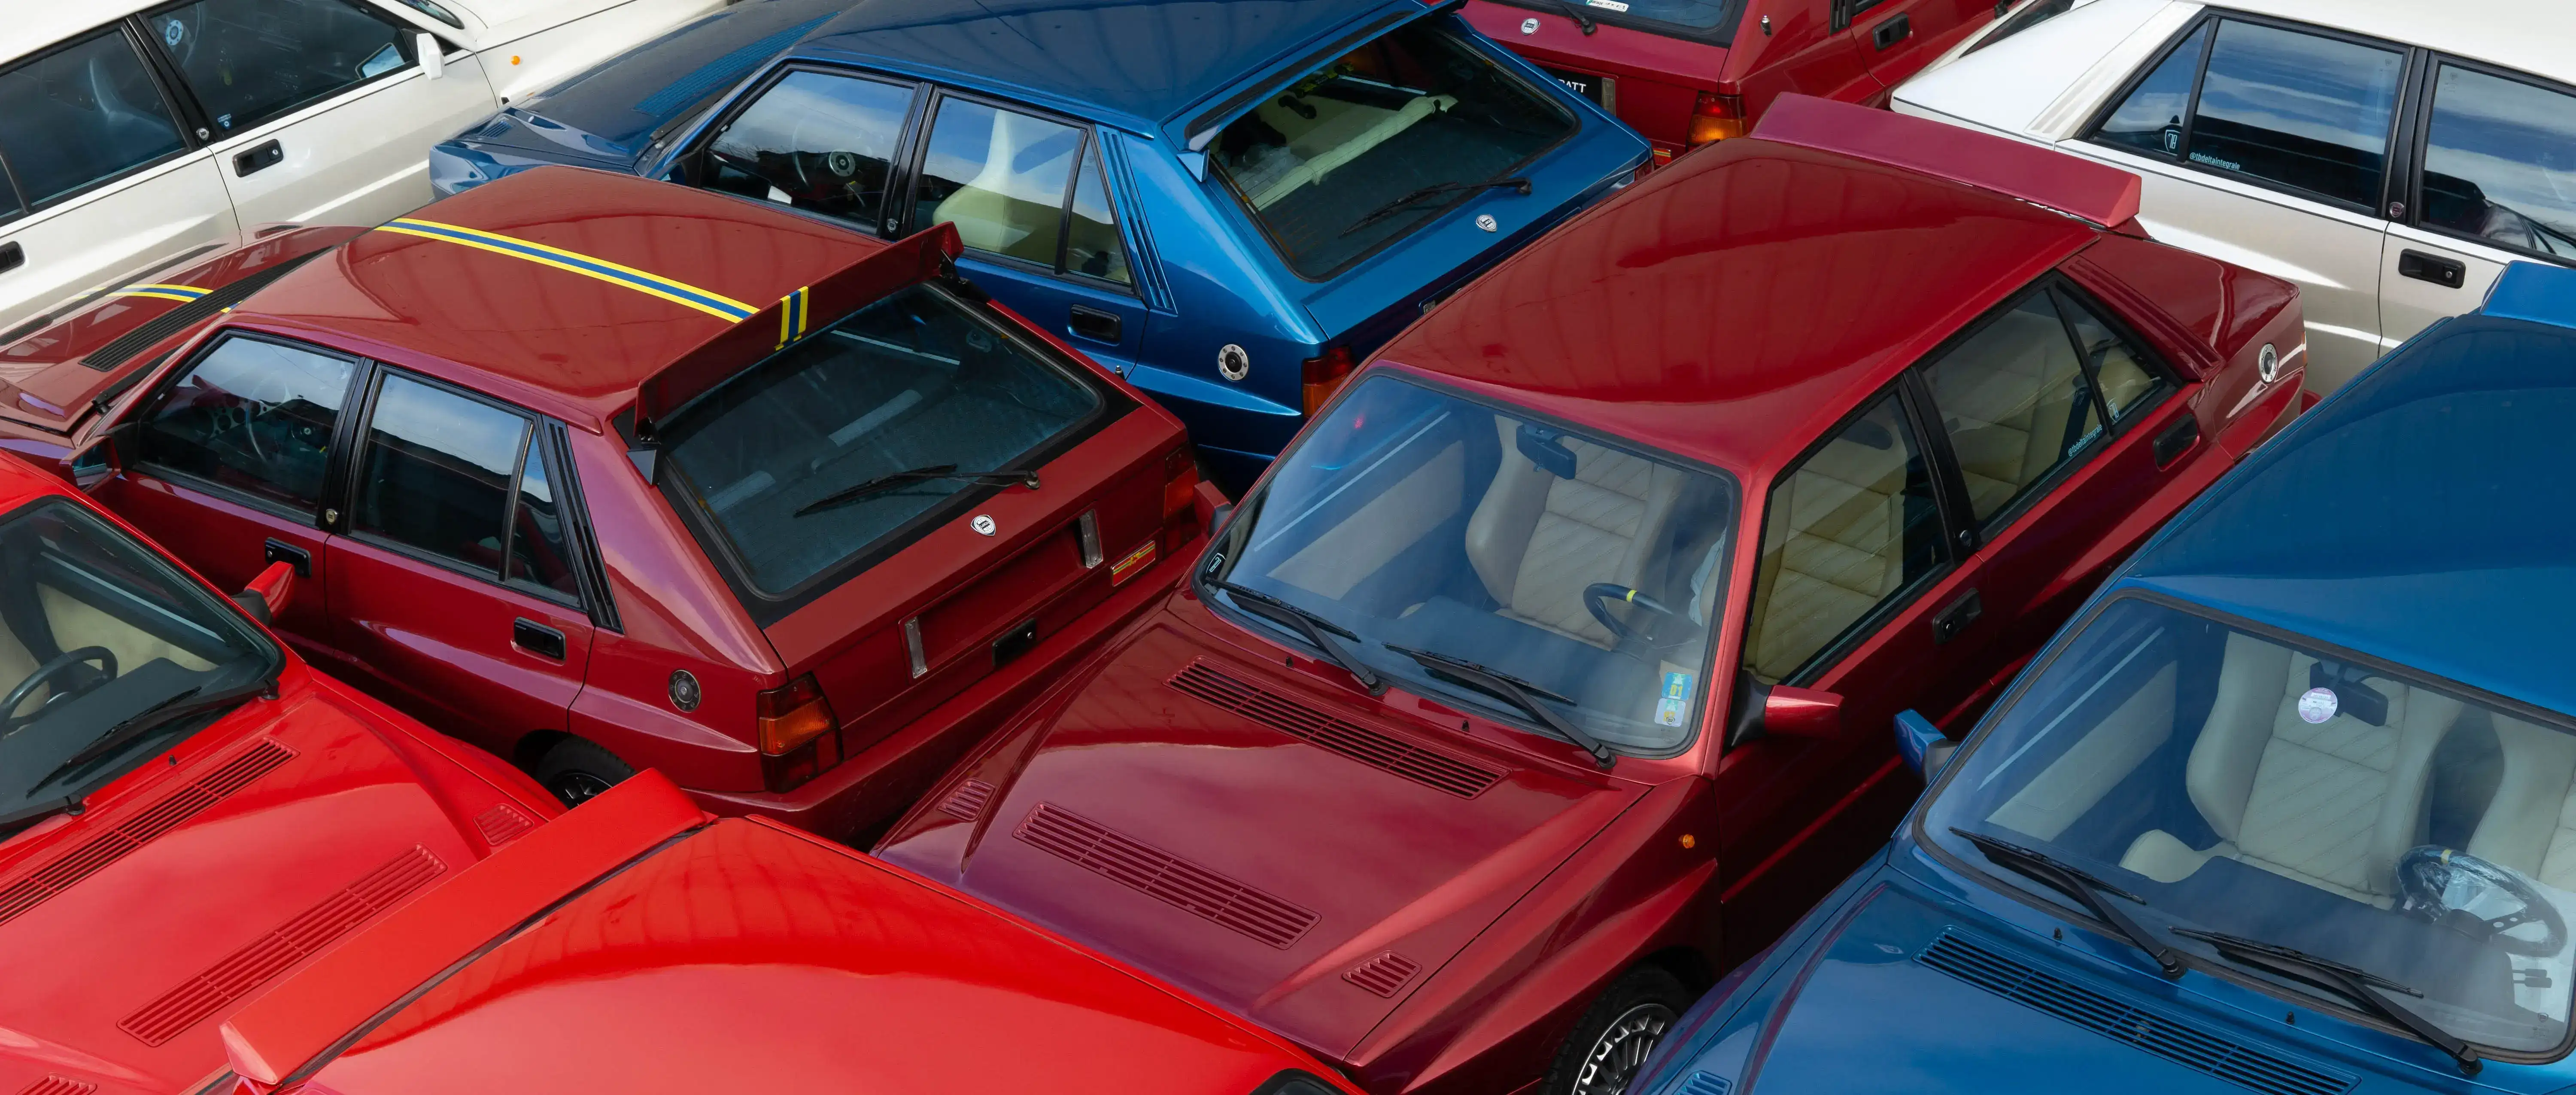 Colourful Lancia Deltas positioned in a pattern